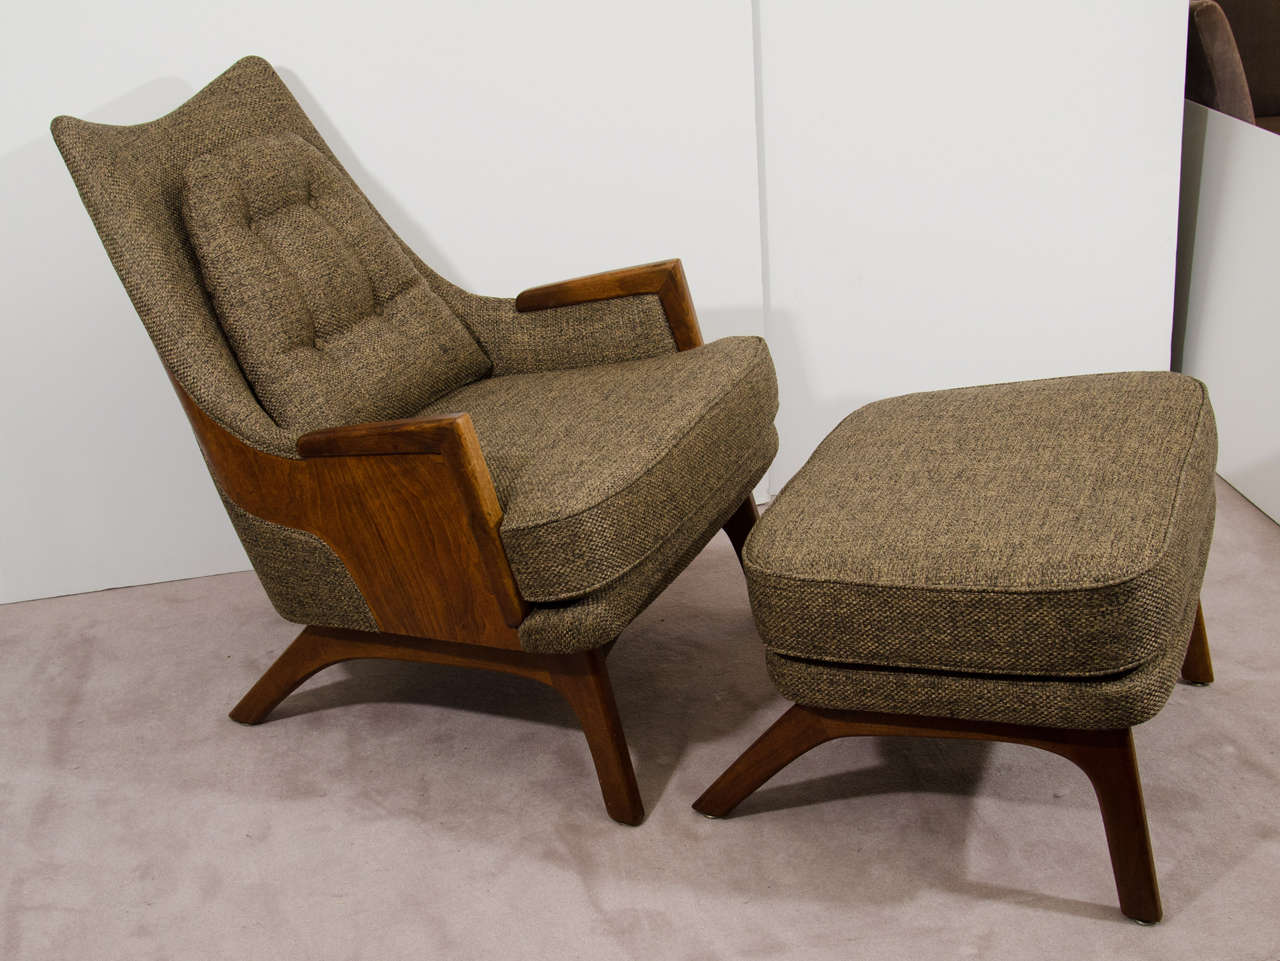 Great Design Lounge chair in teak with High End Taupe Oatmeal button tufted upholstery and matching ottoman by Adrian Pearsall for Craft Associates.
Measurements chair: 36